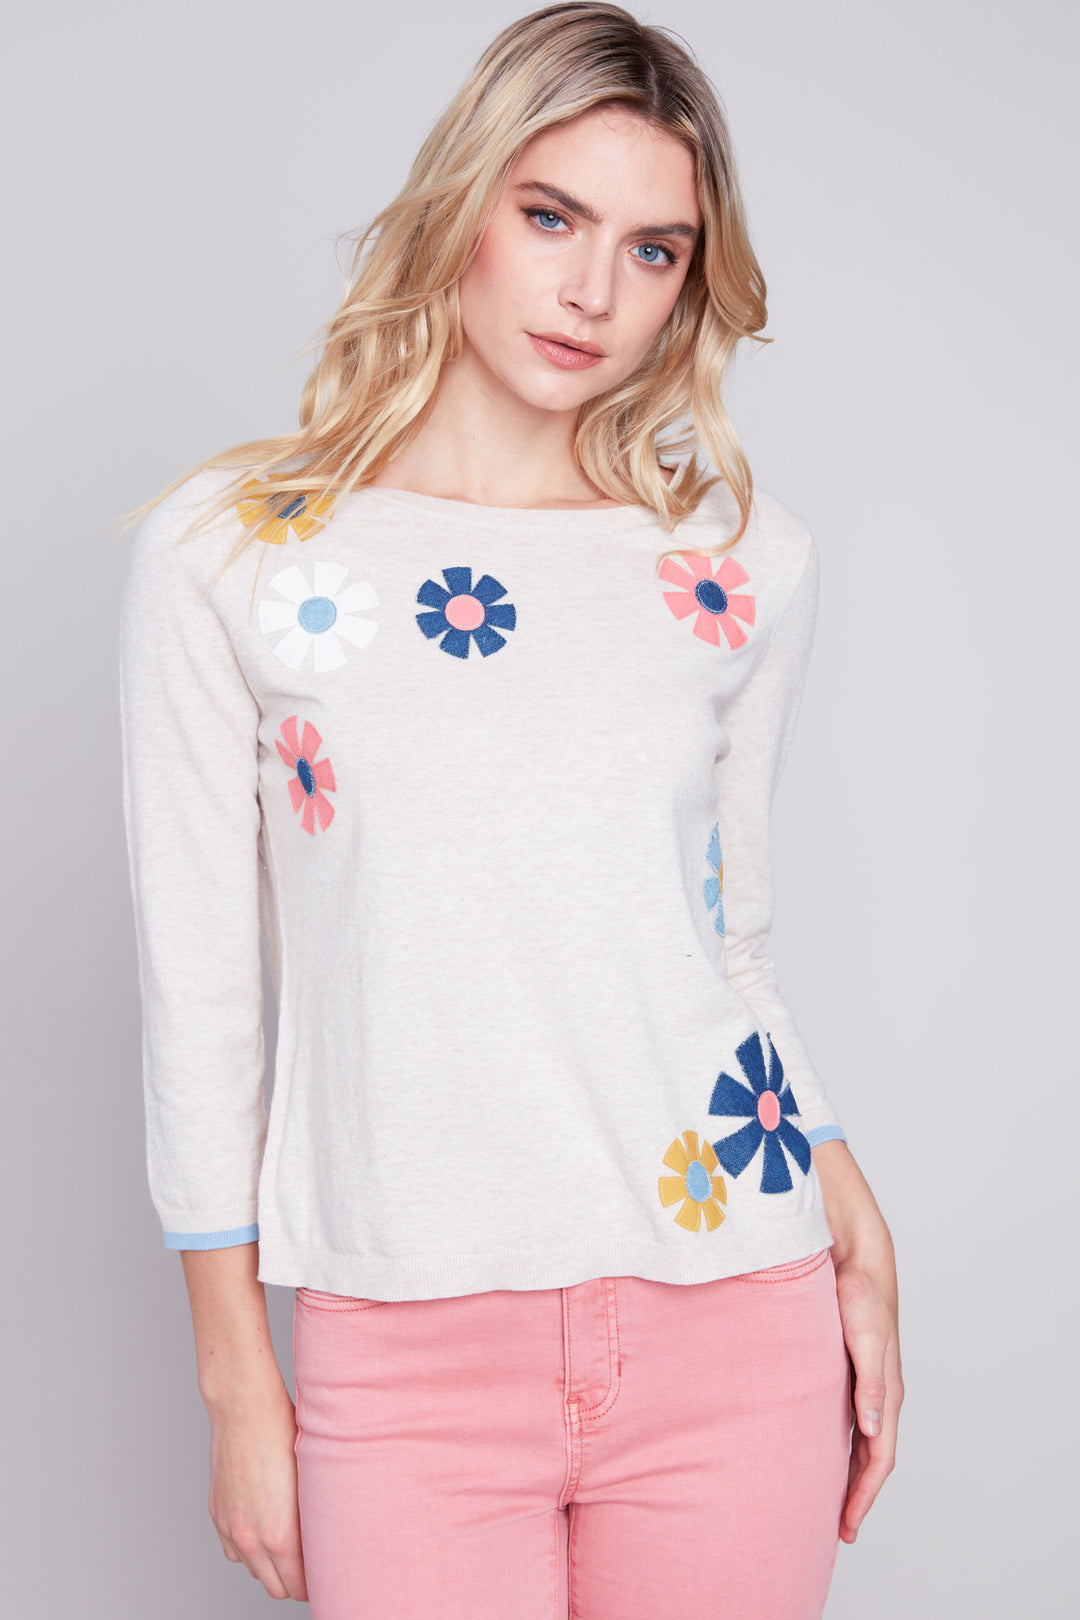 Made from lightweight cotton, this cute sweater top features 3/4 length sleeves, contrast cuffs and a charming collection of spring flowers! 